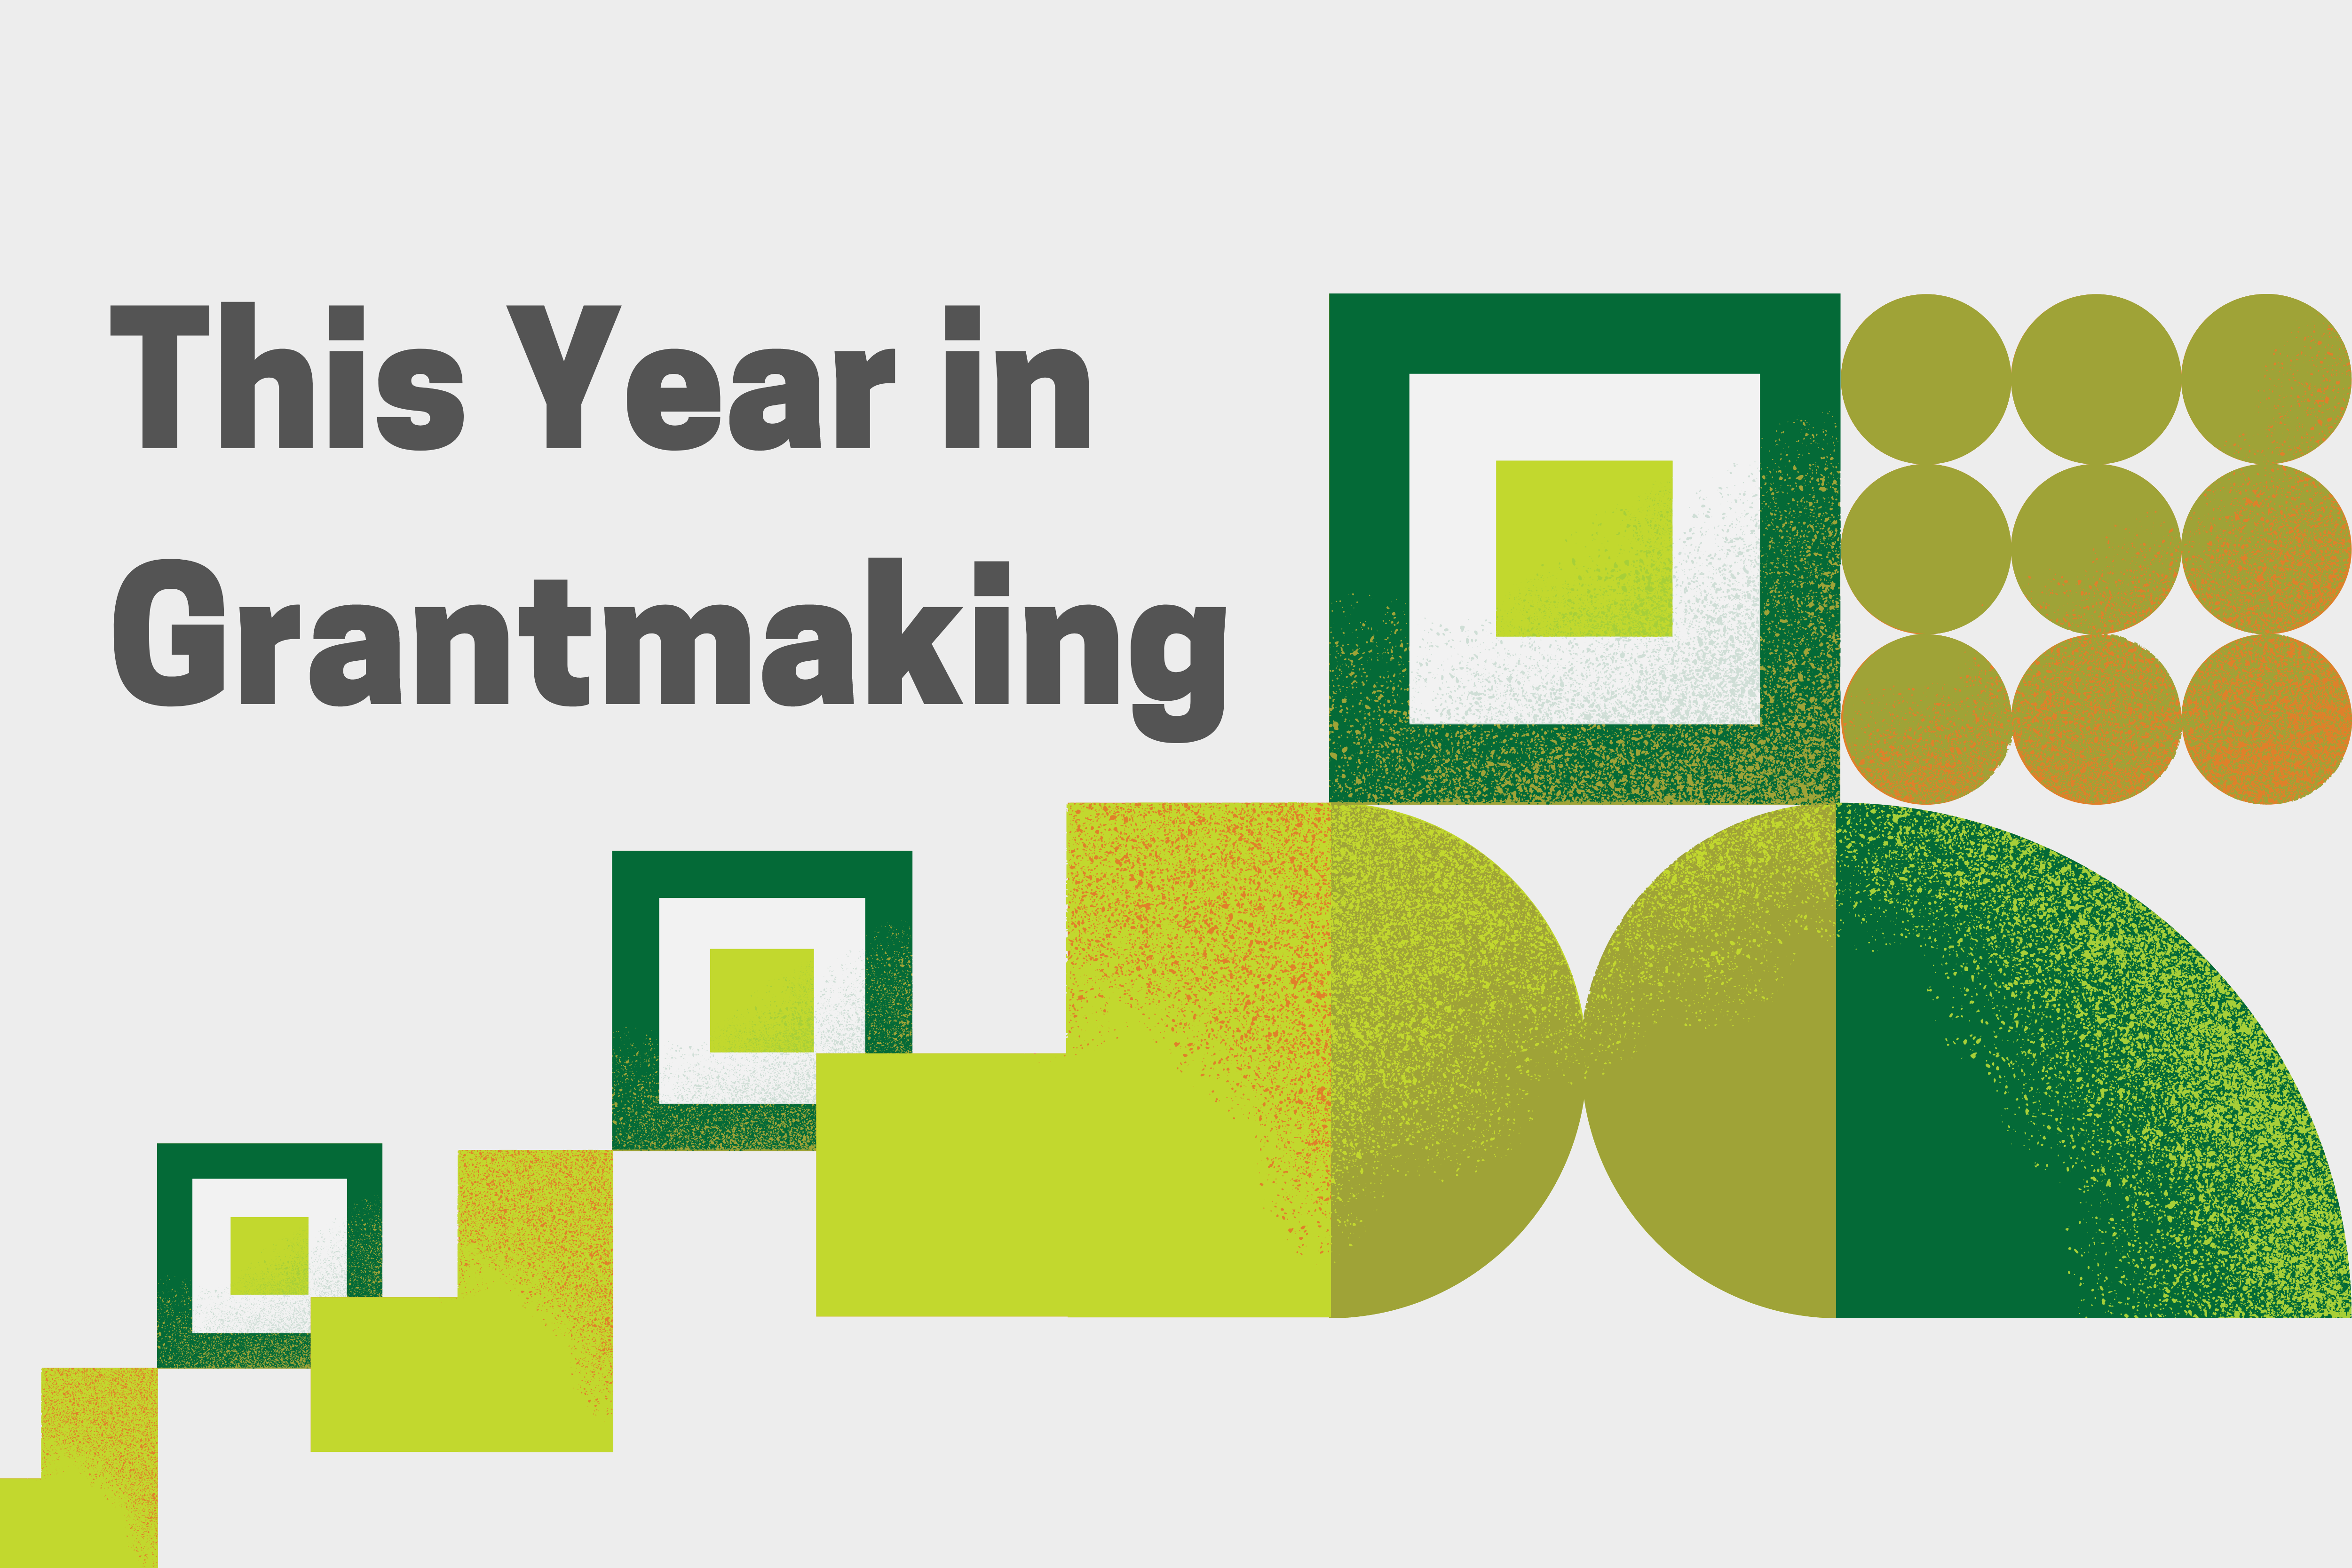 This Year in Grantmaking; image shows pattern of geometric shapes increasing in size in shades of green